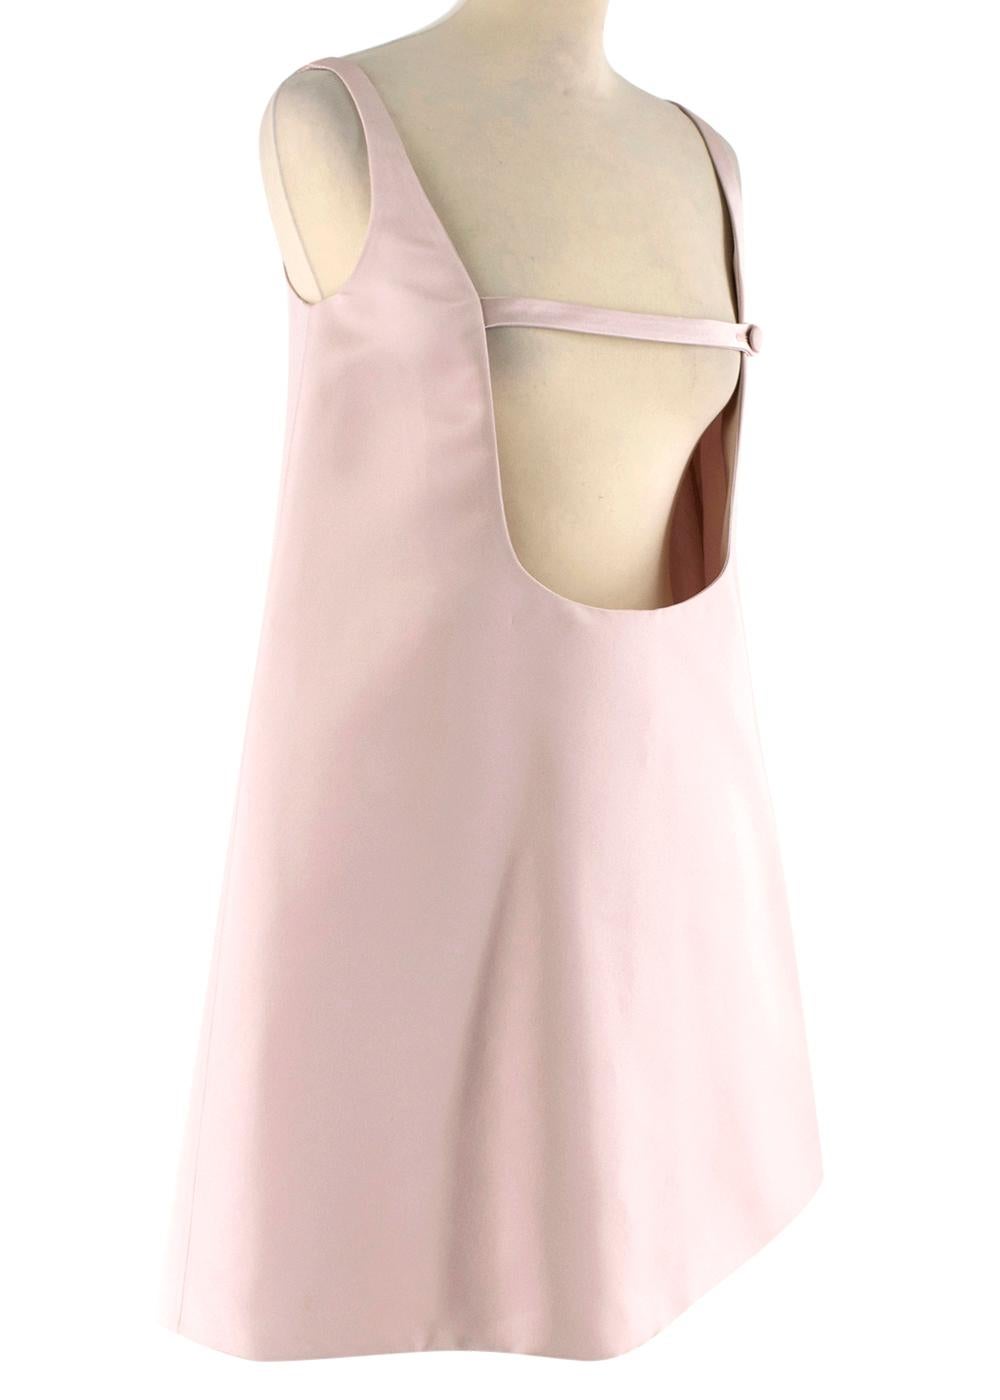 Prada blush silk trapeze pinafore dress. RRP £1855.00

Can be worn either side
Fully Lined
As seen on the runway. Made in Italy. Featuring a hidden zip and hook fastening and one button detail at the back. 

Please note, these items are pre-owned